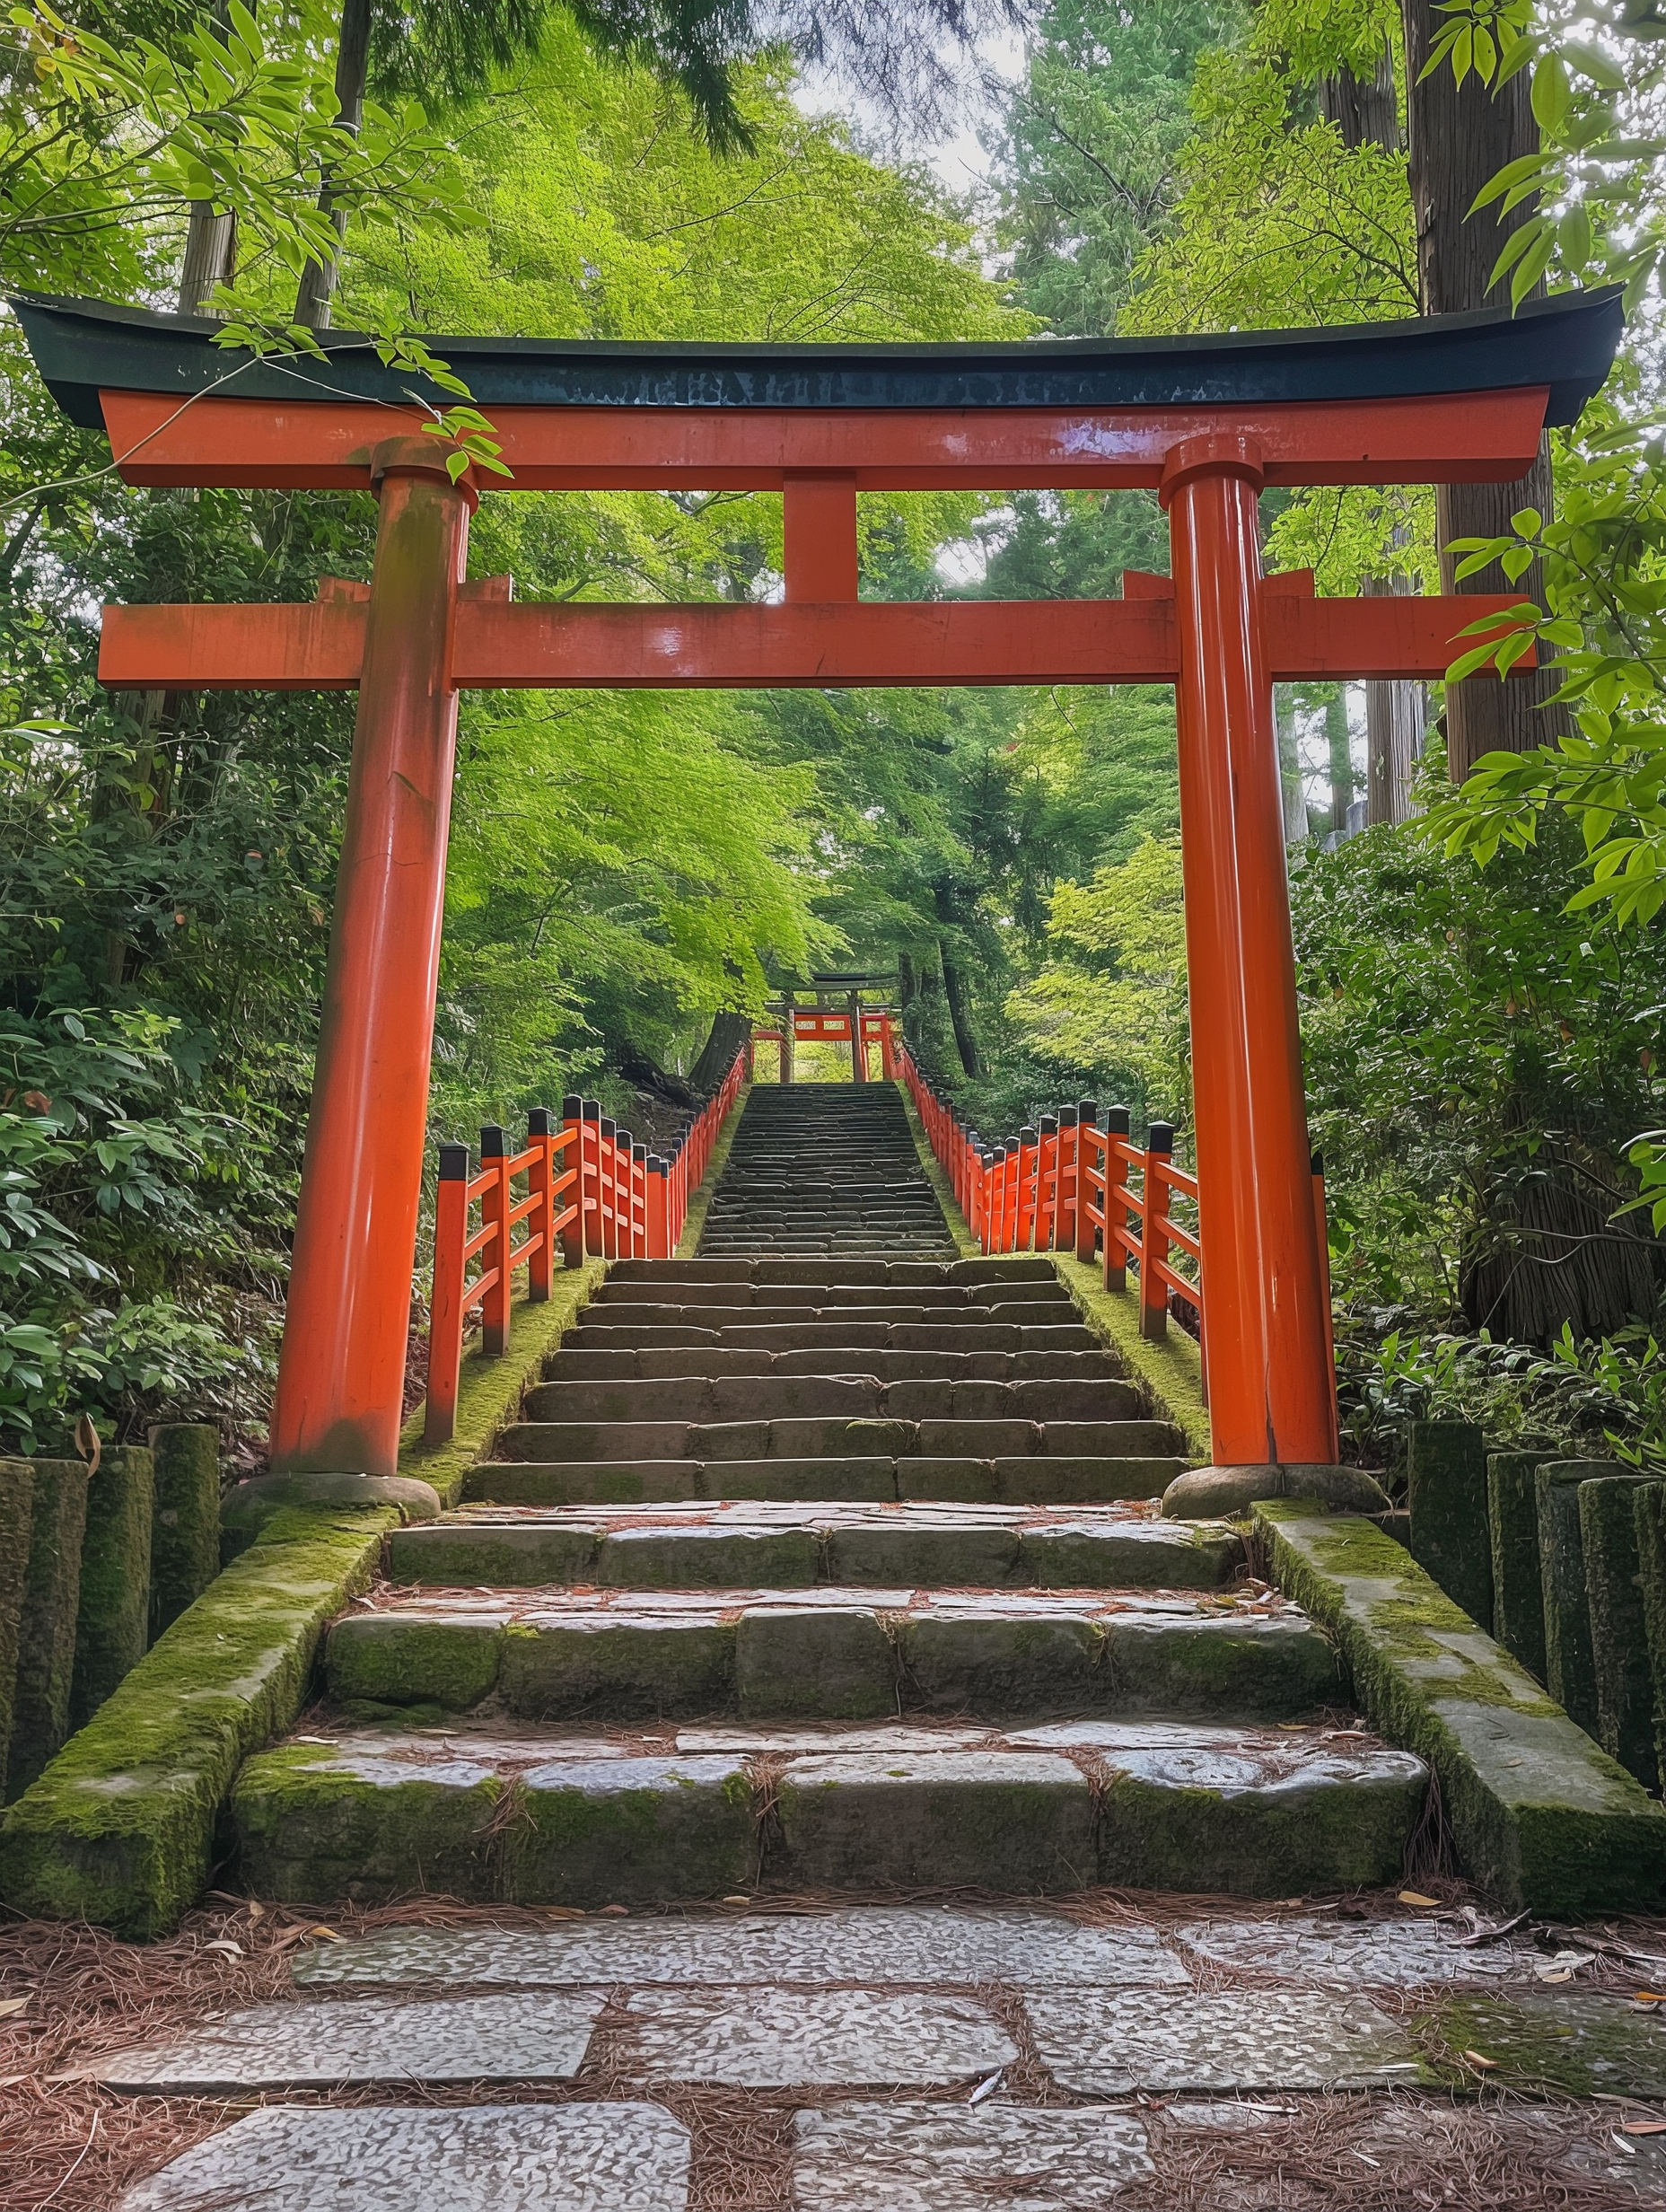 Traditional Vermillion Torii Gate in Japanese Forest